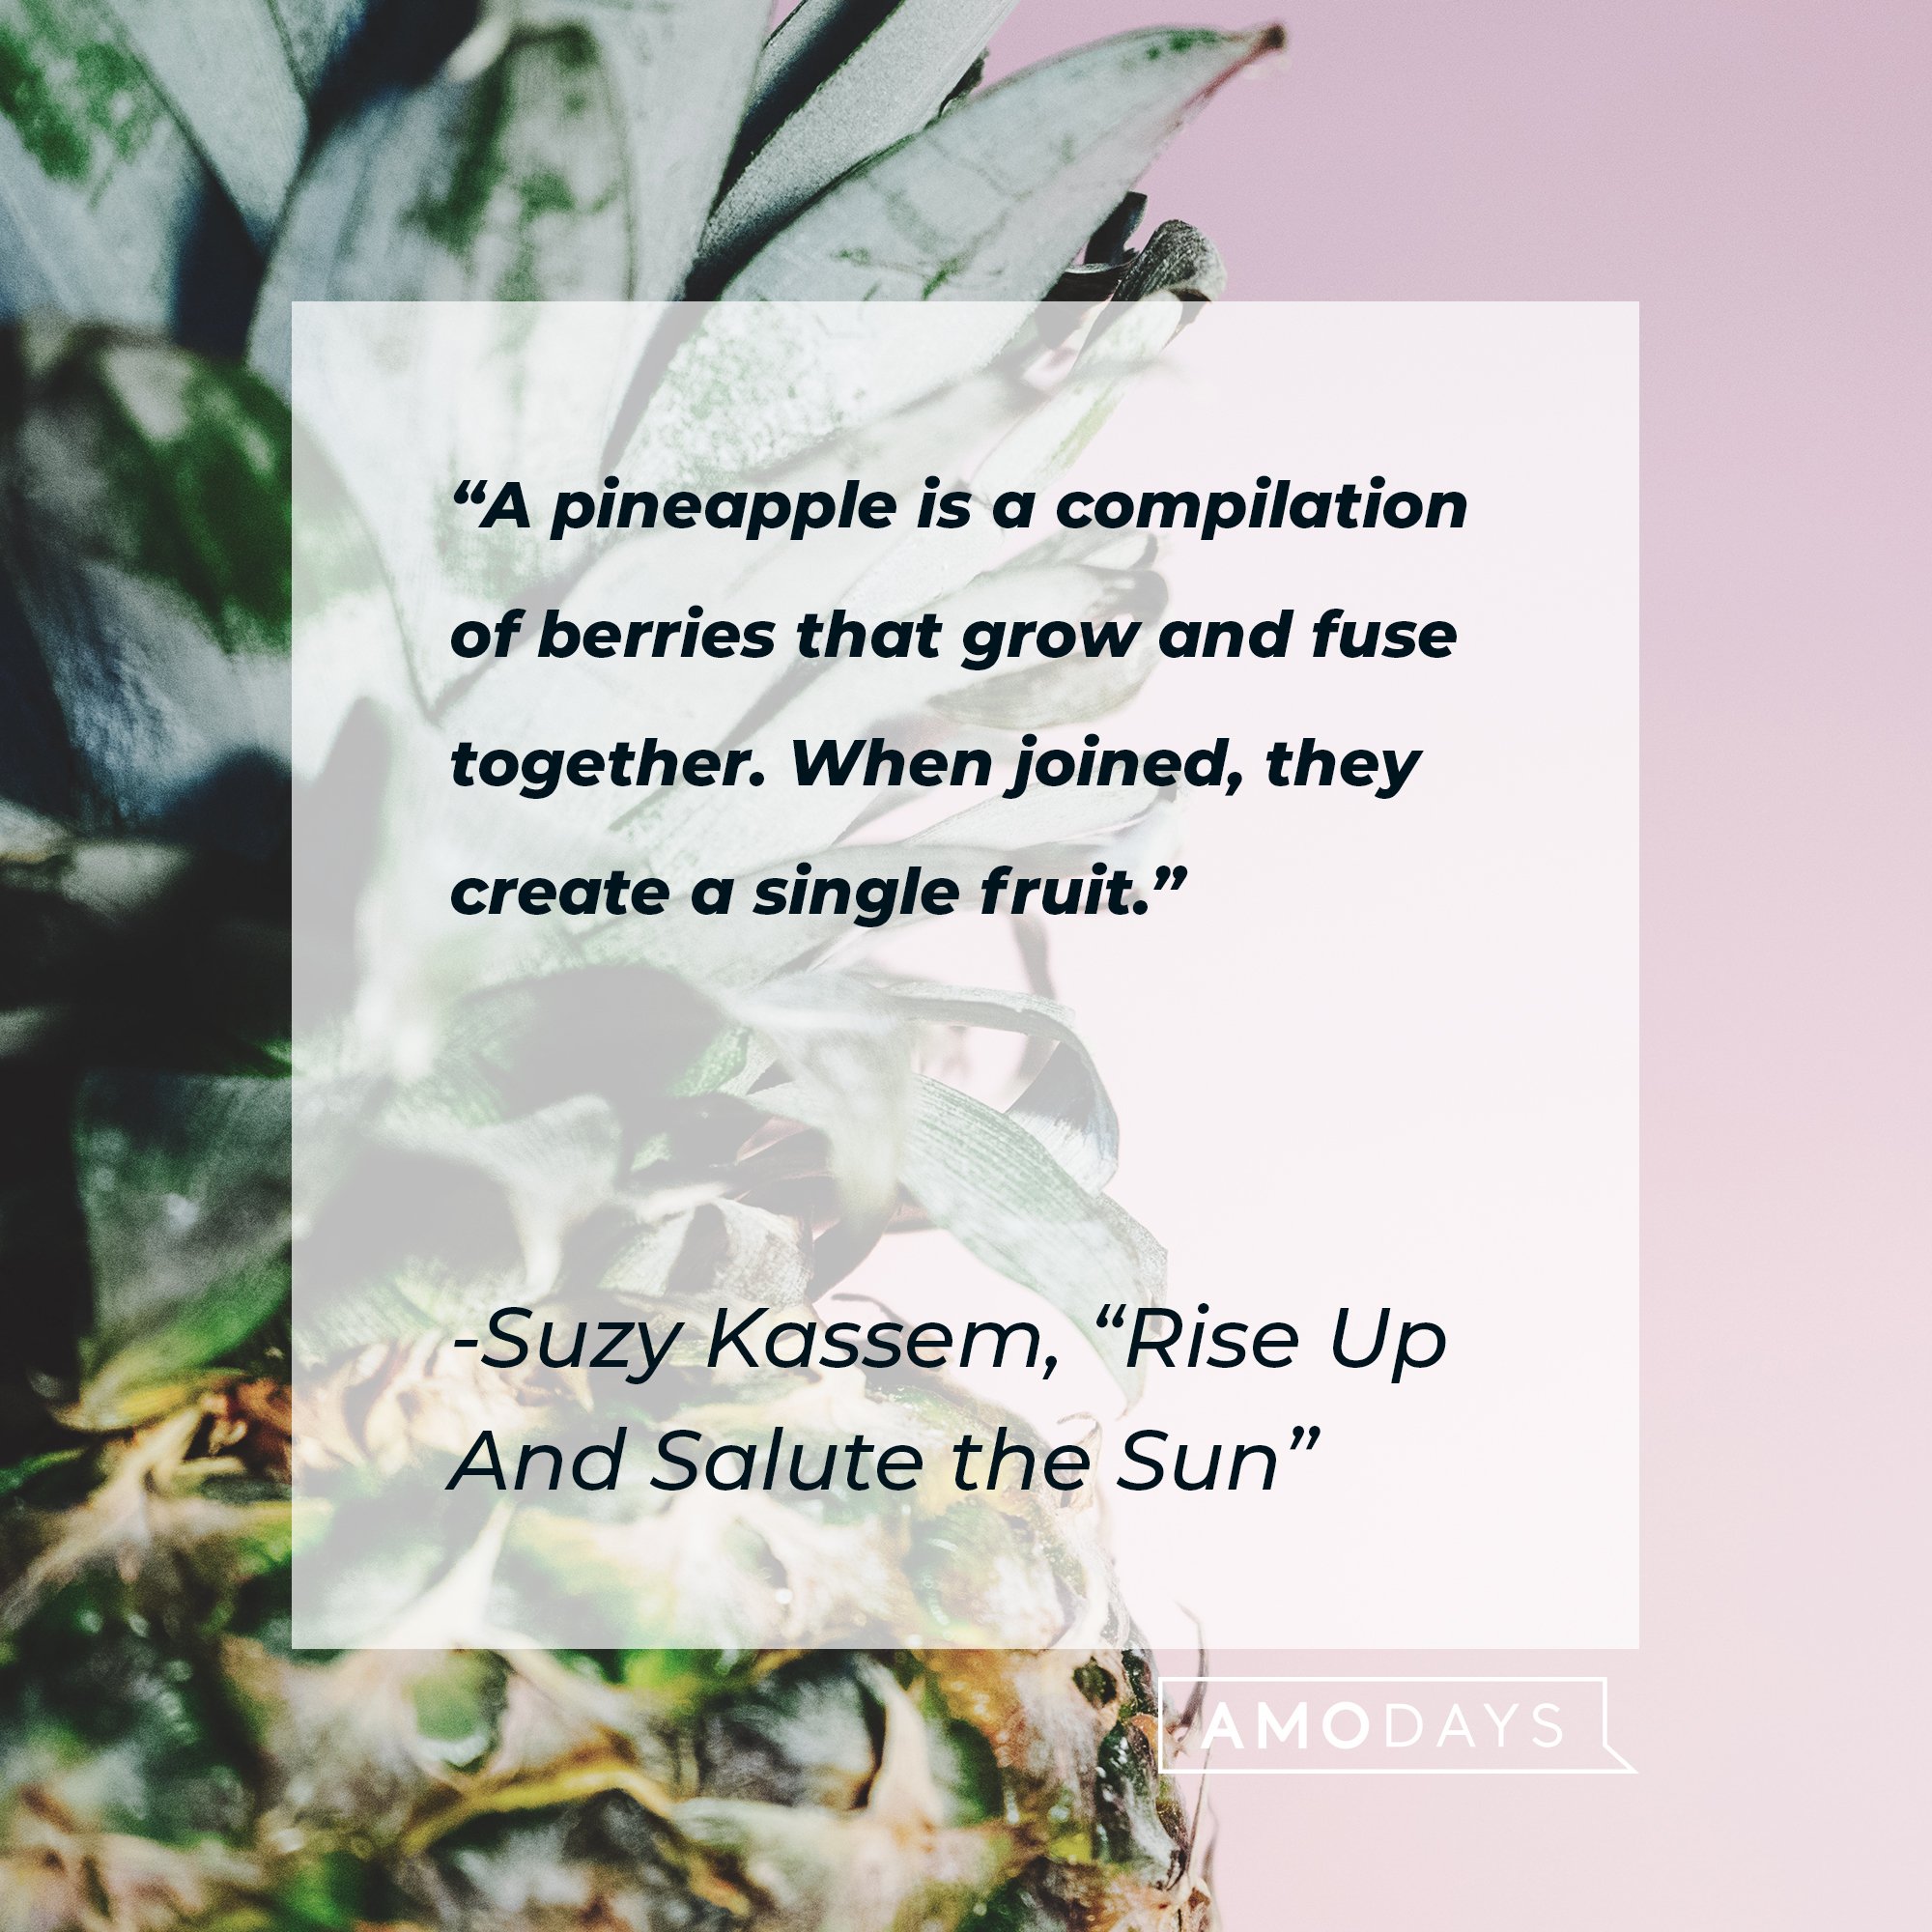 Suzy Kassem's "Rise Up And Salute the Sun" quote: "A pineapple is a compilation of berries that grow and fuse together. When joined, they create a single fruit." | Image: AmoDays